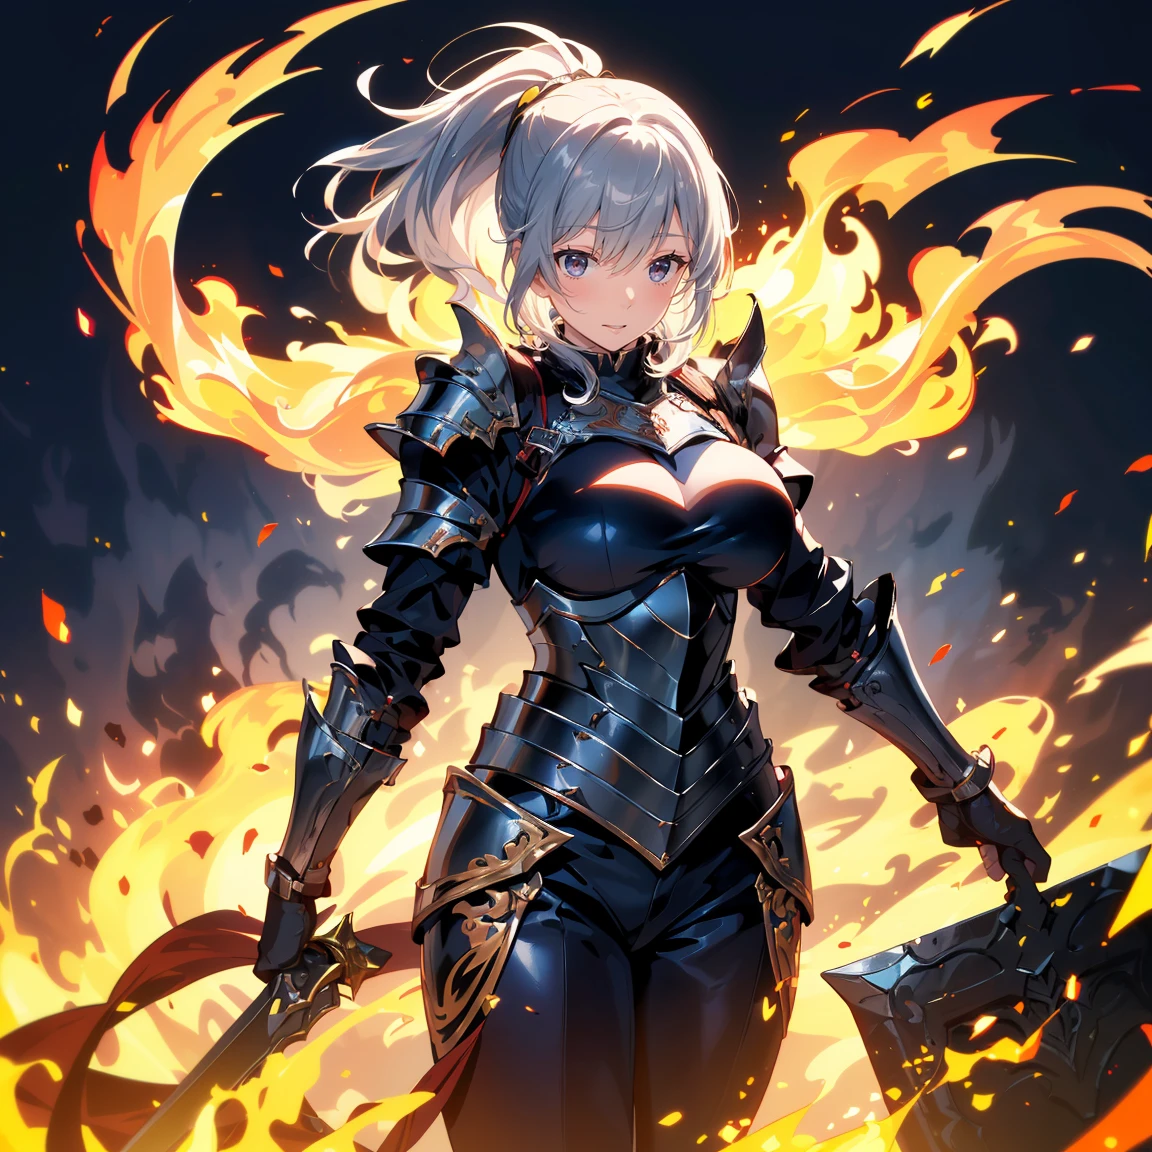 highest quality, Super detailed, (ultra high resolution,8K), Ultra-high definition 4K, (perfect anatomy, anatomically accurate), (One woman with big breasts has sexy charm), (Paladin), (Beautiful armor of flame that covers the whole body:1.6), (sharp look), ((flaming cloak)), (surrounded by detailed flames:1.5), silver hair, (ponytail), (dynamic composition), high definition beauty face, (Beautiful blue eyes like sapphires), (open your mouth), photorealistic, shiny skin, (fine-textured skin,hair ), Near the magma, Crystal clear and clean water, (((midnight, dark))), (Decisive pose:1.3), (Hold a detailed beautiful sword), fire,floating,flame,magic,glowing, shinkai makoto